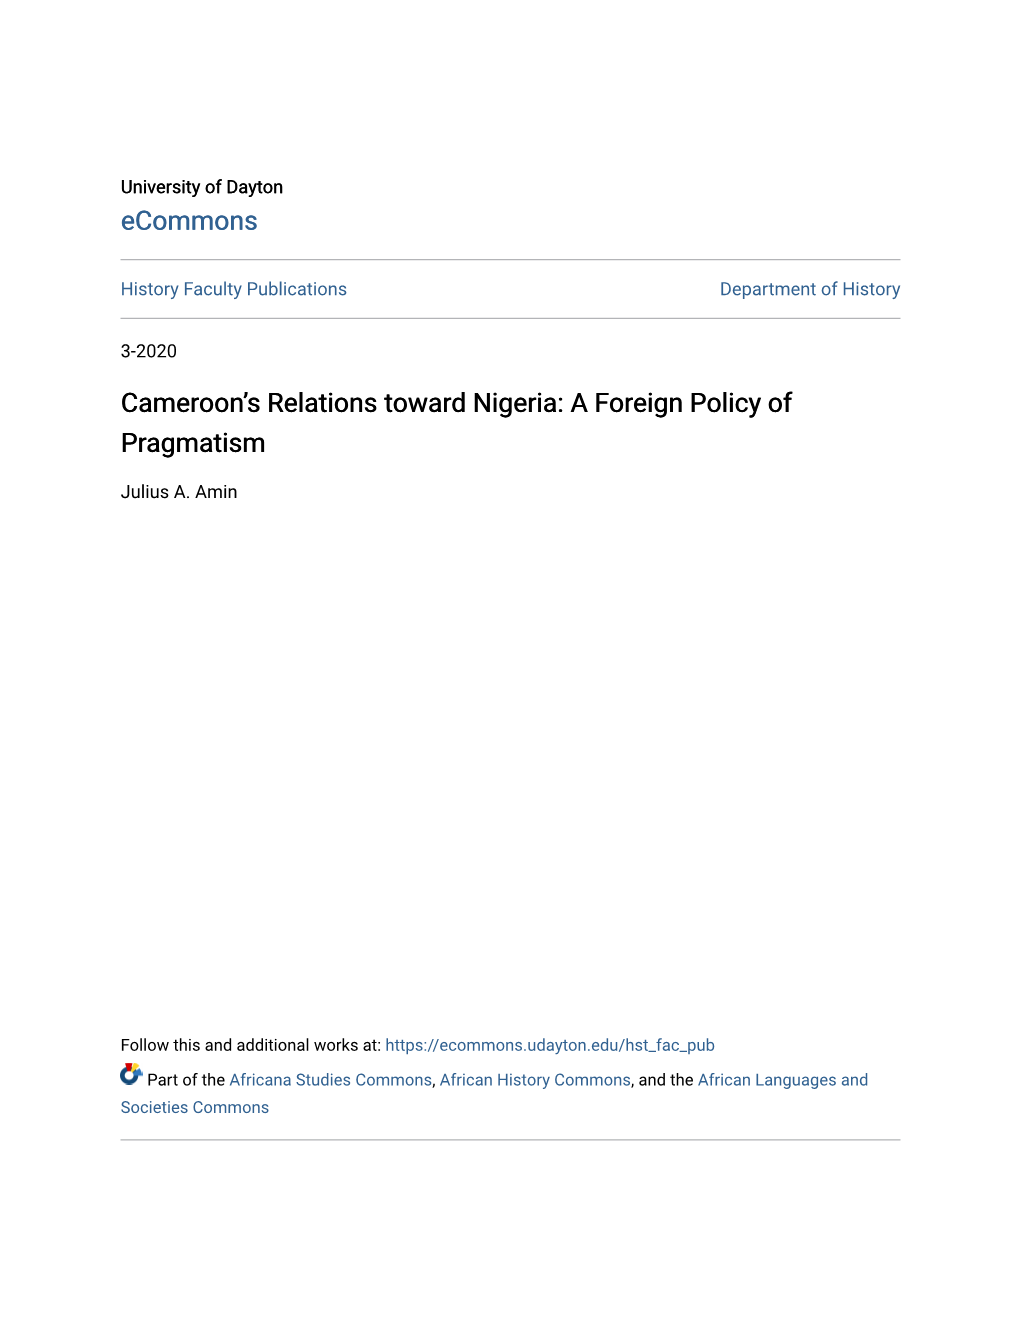 Cameroon's Relations Toward Nigeria: a Foreign Policy of Pragmatism